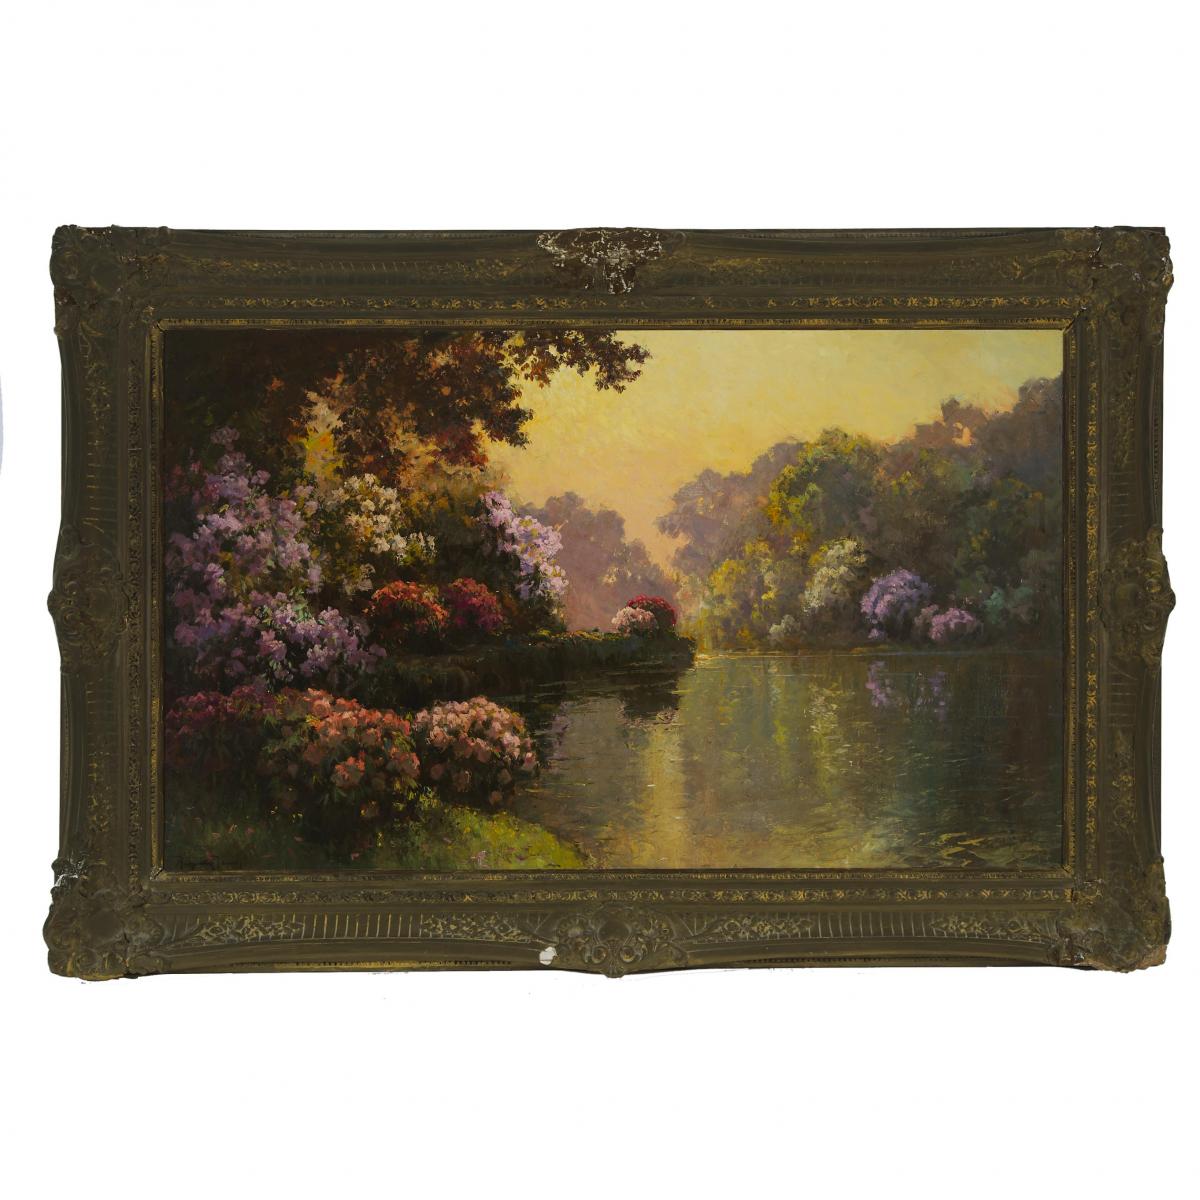 Jenö Karpathy (1870-1950), SPRING BLOOMS ON THE BANKS OF THE RIVER SEINE, Oil on canvas; signed lowe - Image 2 of 4